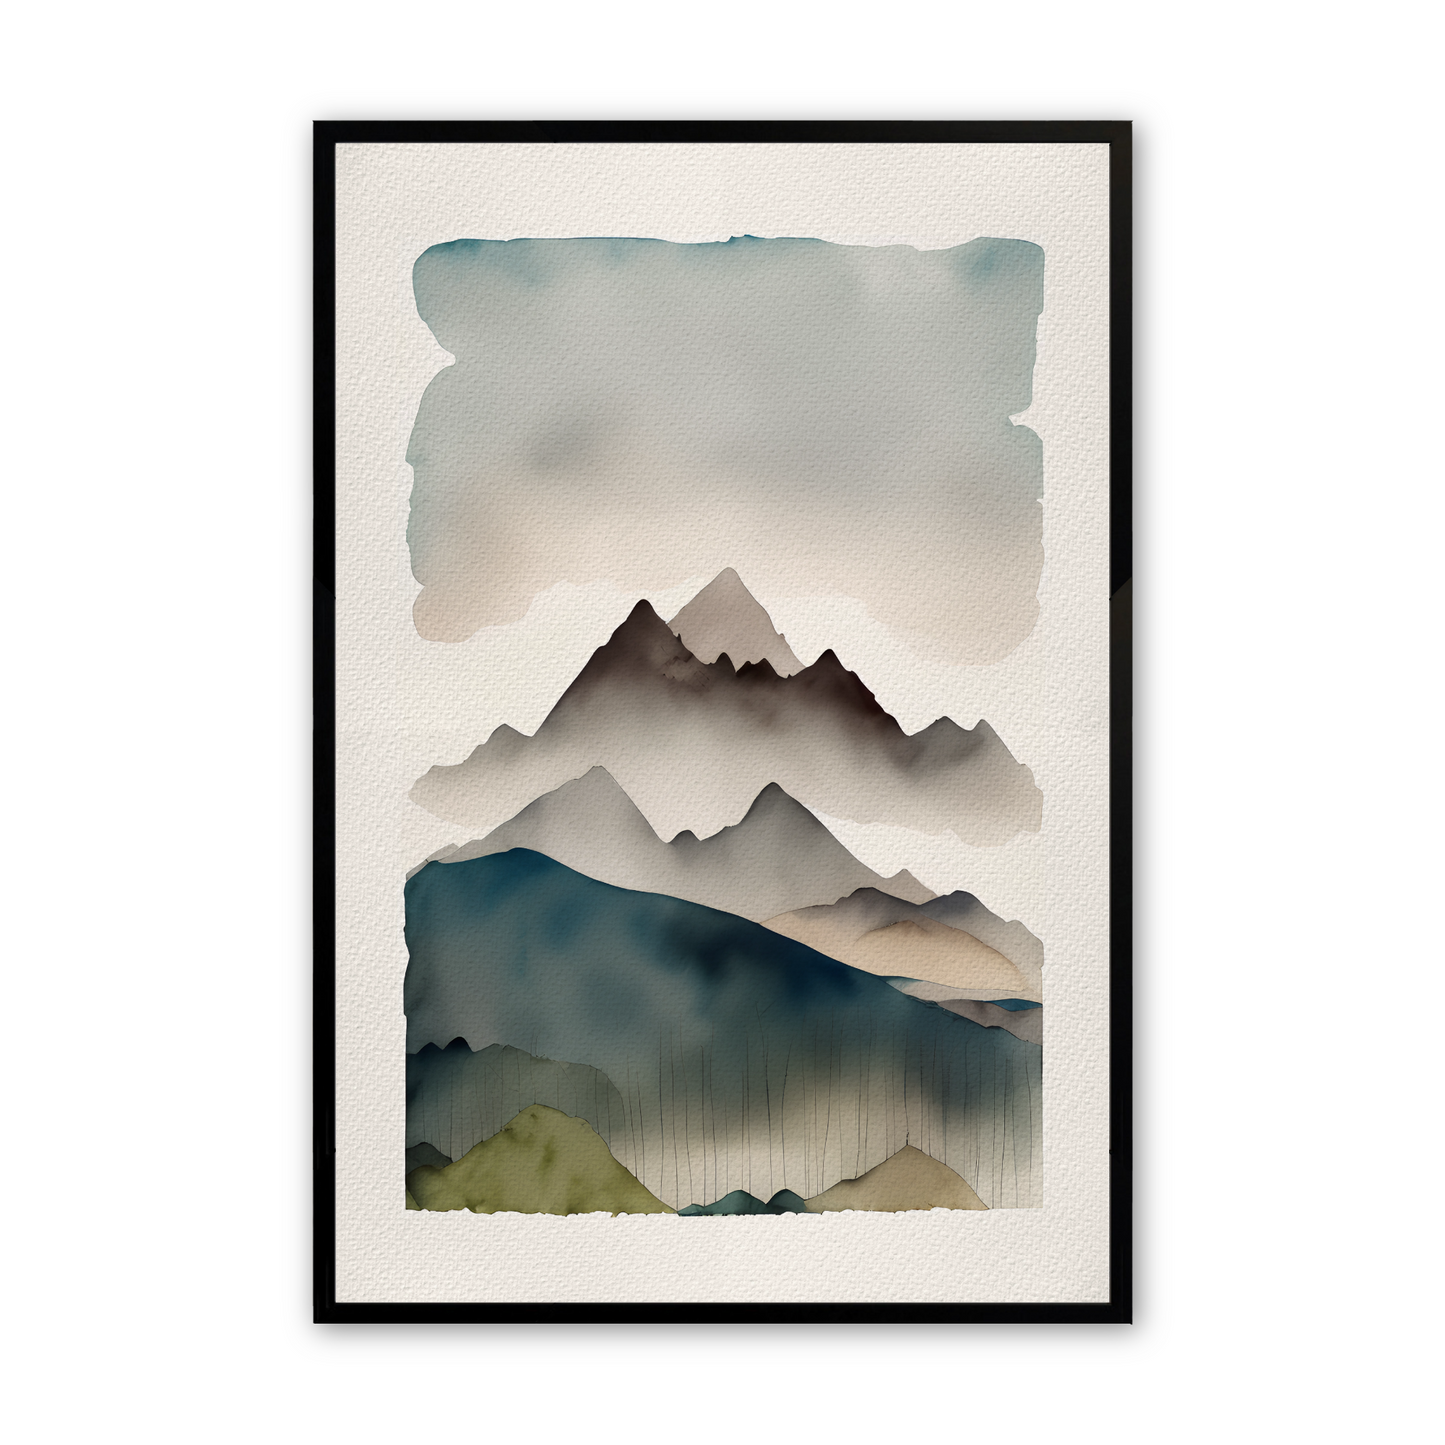 [color:Satin Black], Picture of the second of 3 watercolor prints of a forest mountainscape in a black frame